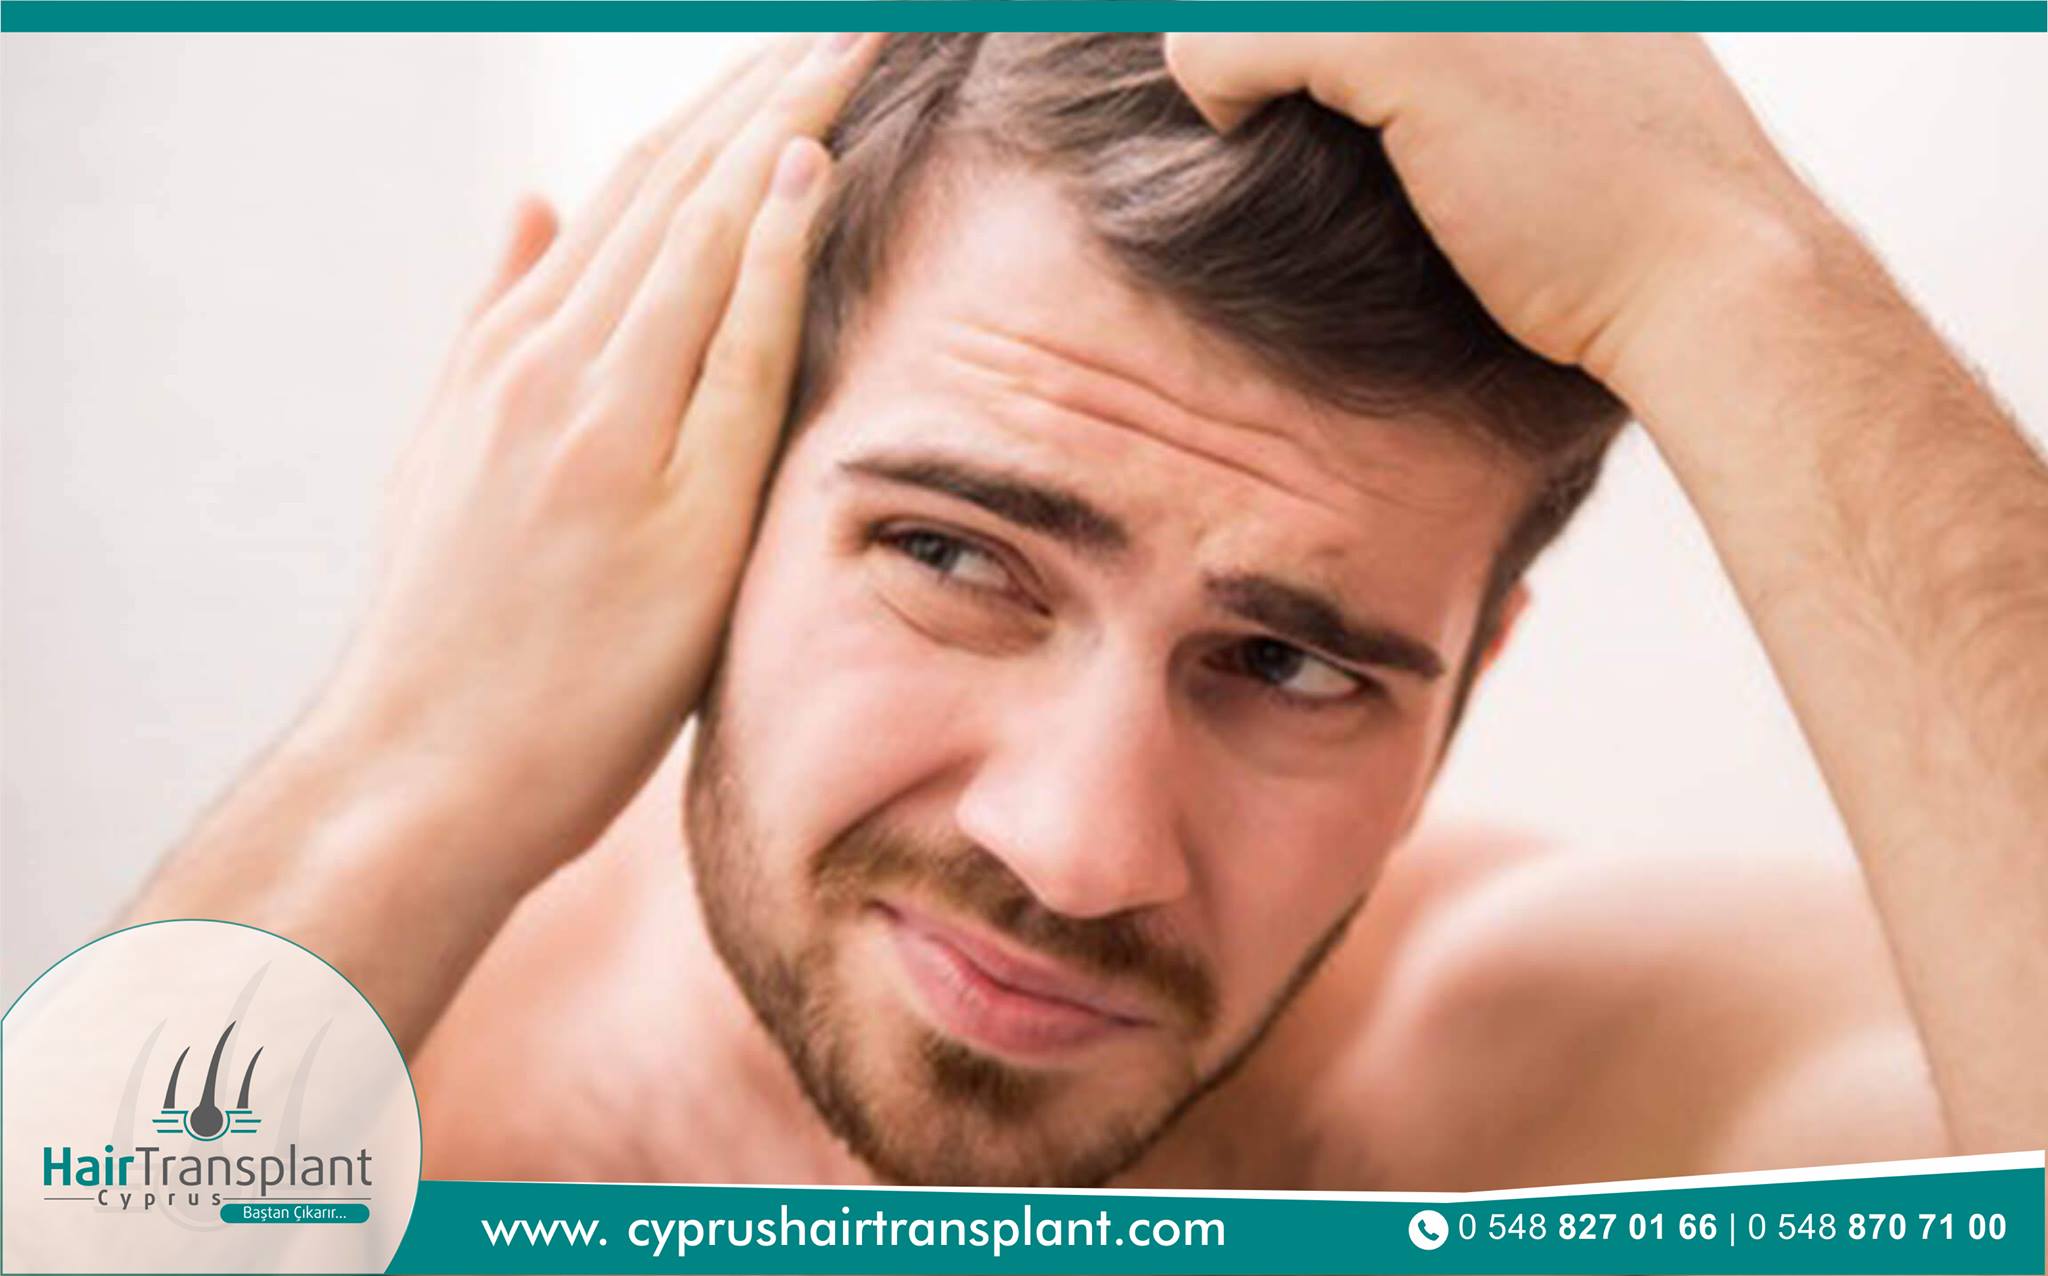 Cyprus Hair Transplant Clinic - Hair Transplant Clinics | Find Hair Loss  Surgeons in Our Exclusive Hair Restoration Network Worldwide